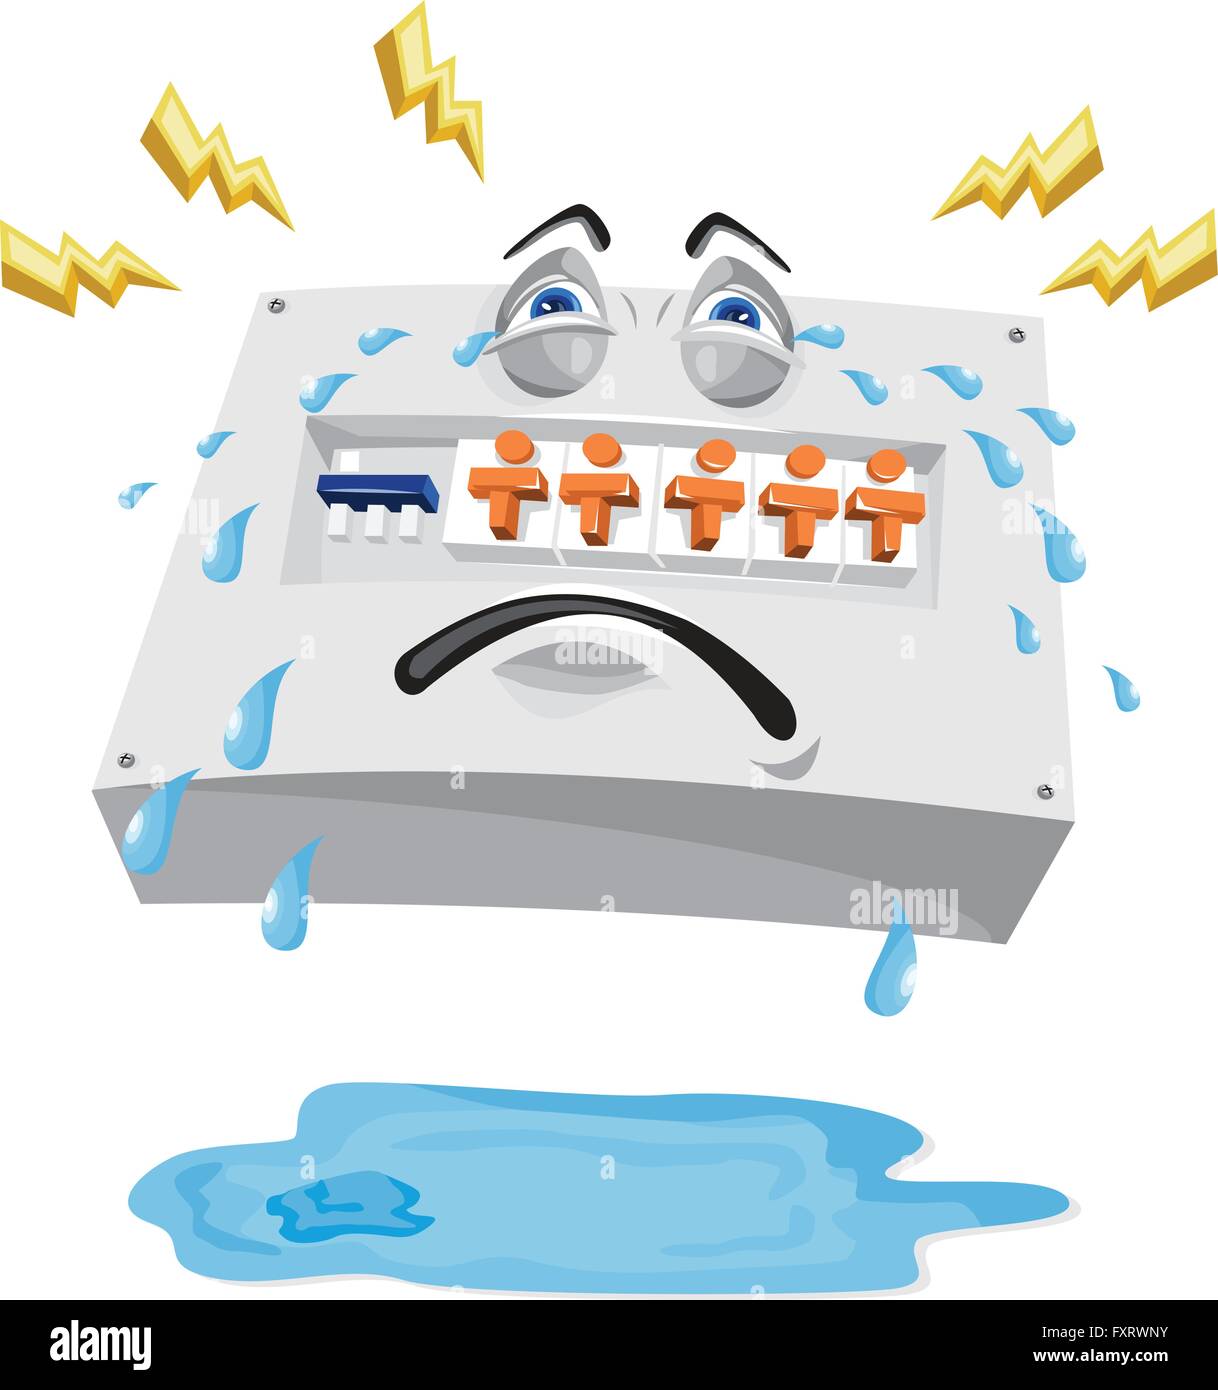 Illustration of an industrial switchboard crying with tears falling and lightning bolts with pool of water on ground viewed from front set on isolated white background done in cartoon style. Stock Vector